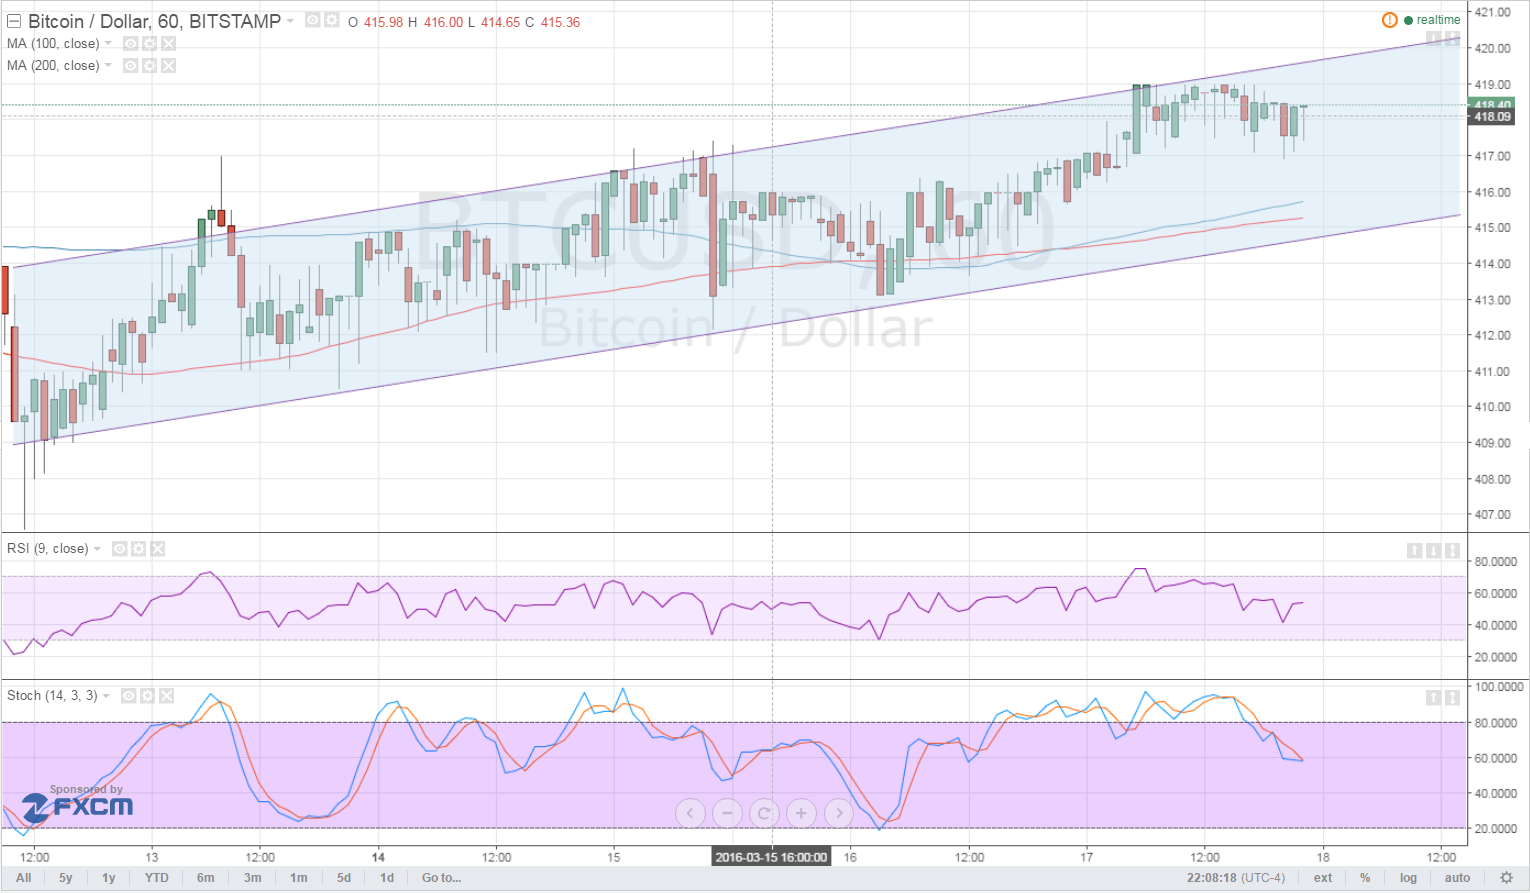 Bitcoin Price Technical Analysis for 03/18/2016 - Channeling Higher!